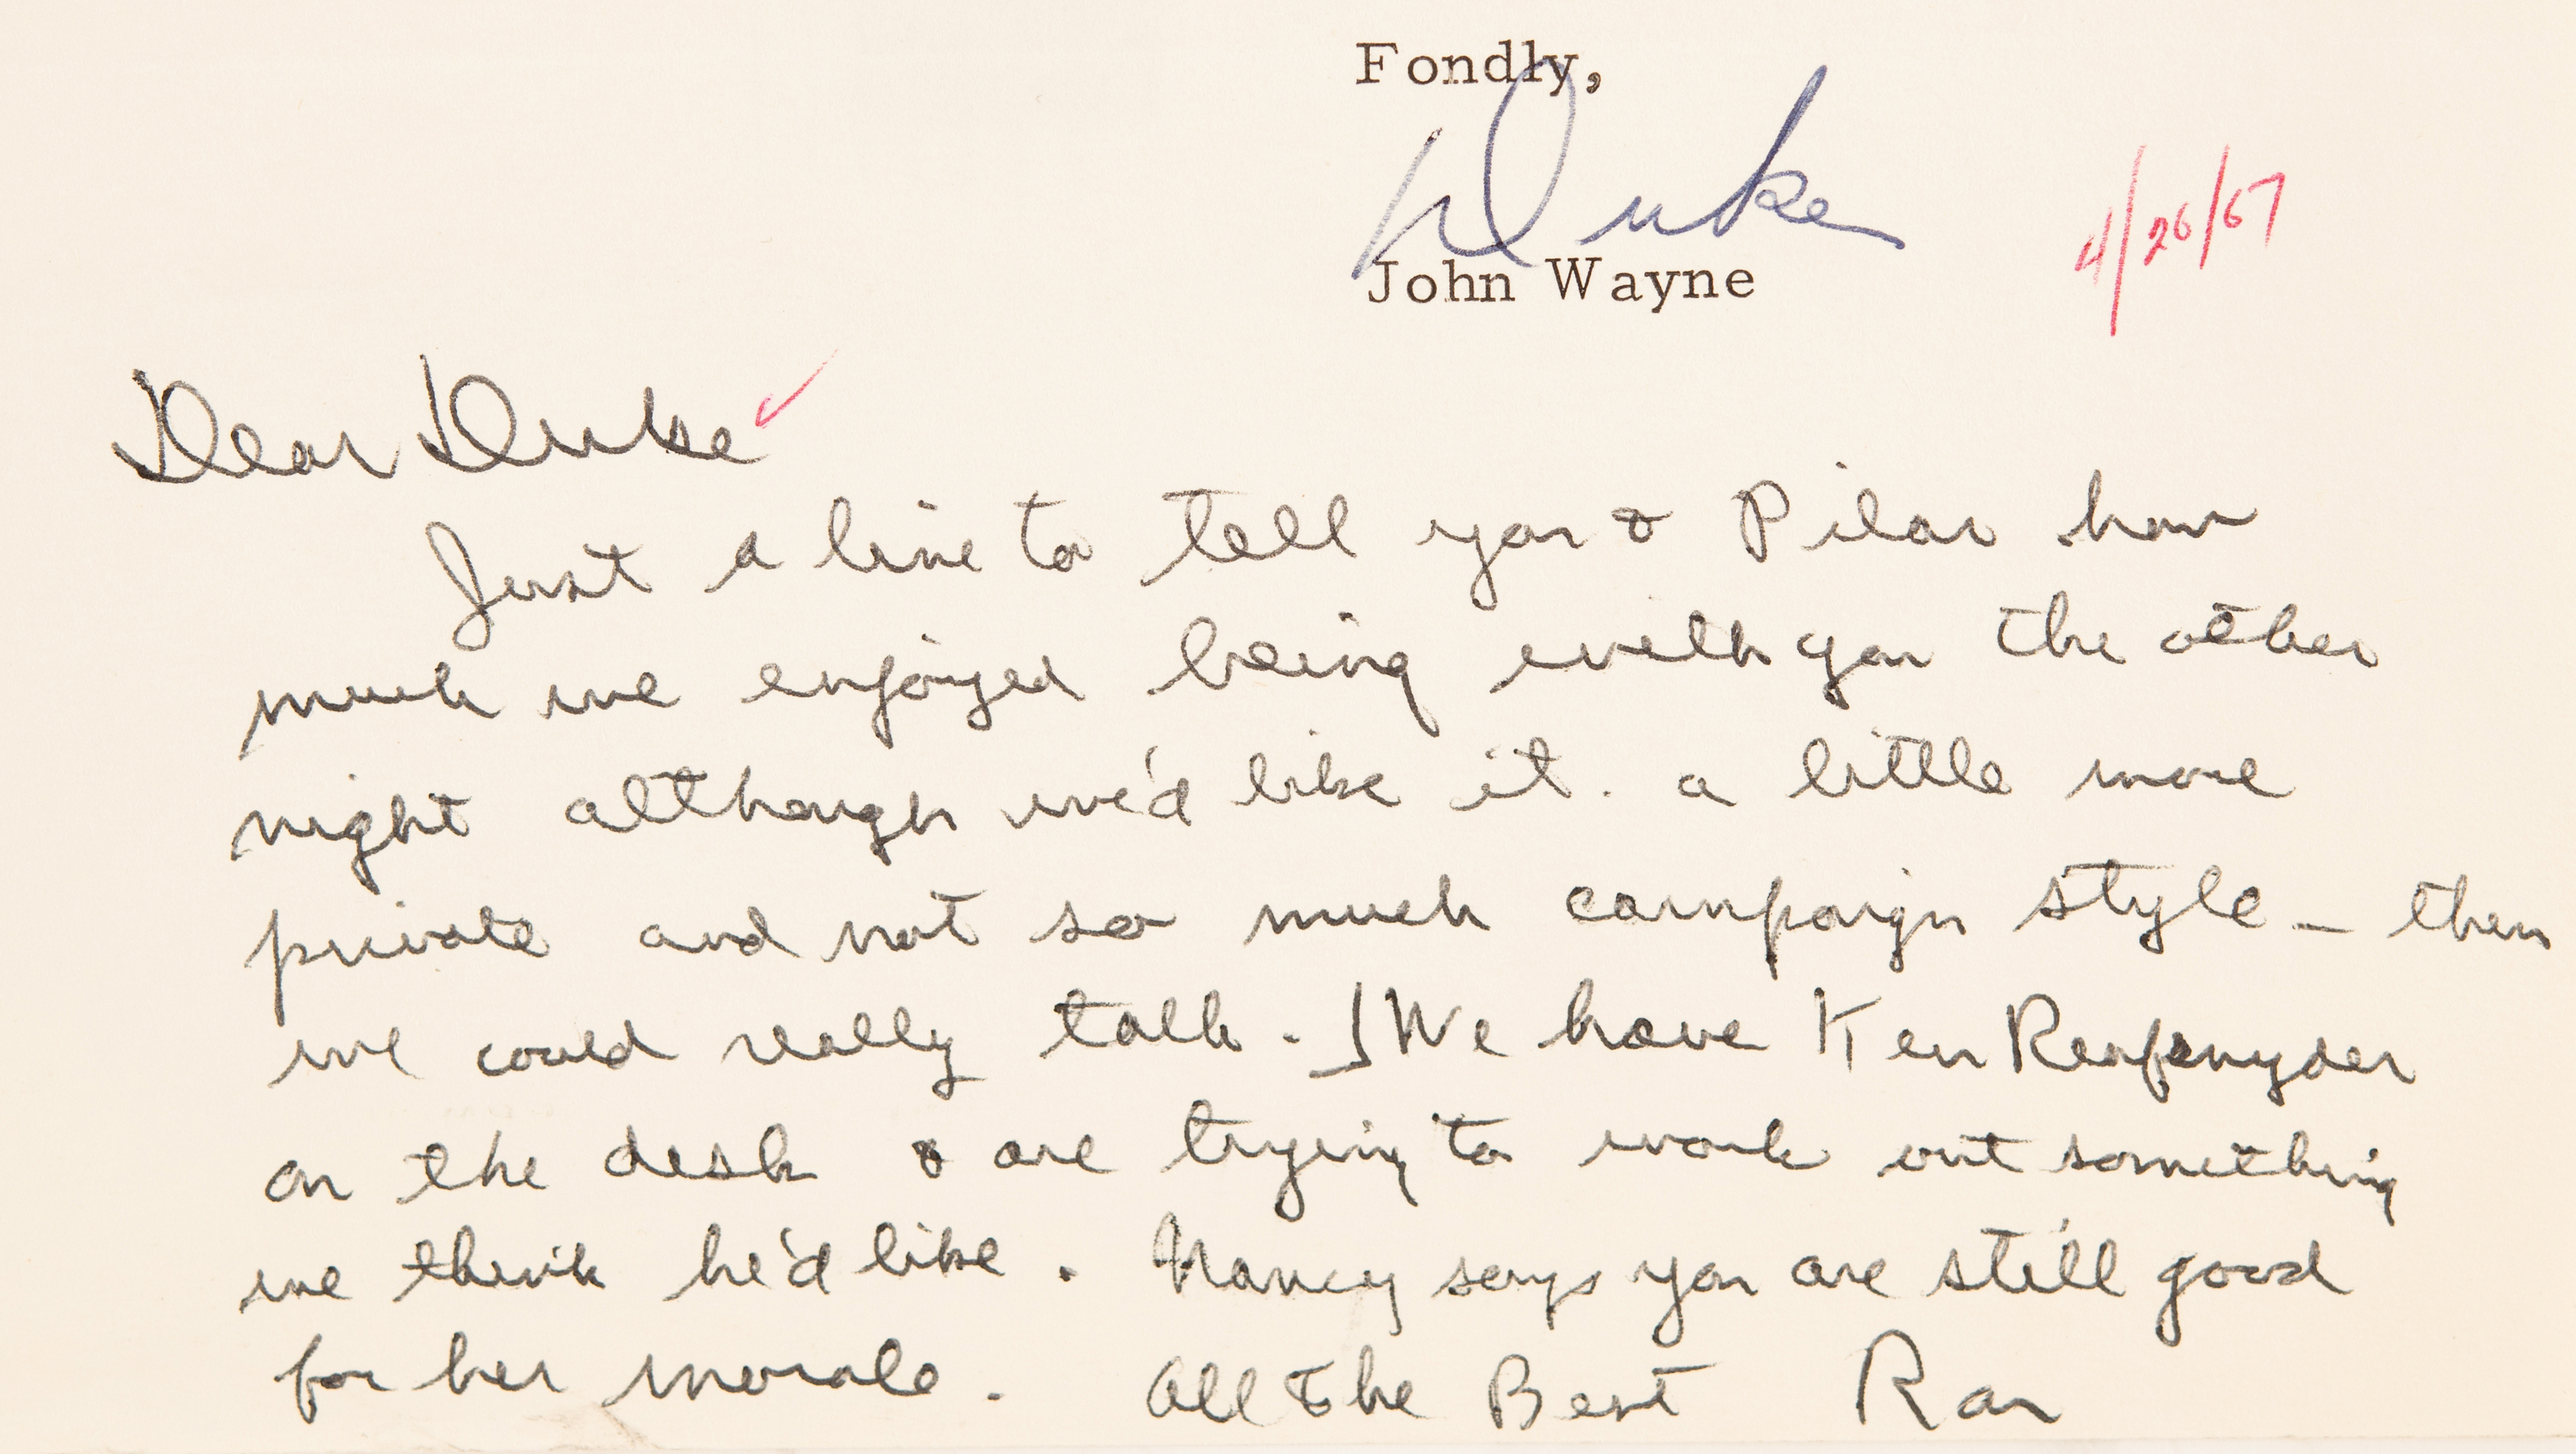 Lot #90 Ronald Reagan and John Wayne Autograph/Typed Letter Signed: "We'd like it a little more private and not so much campaign style—then we could really talk" - Image 2